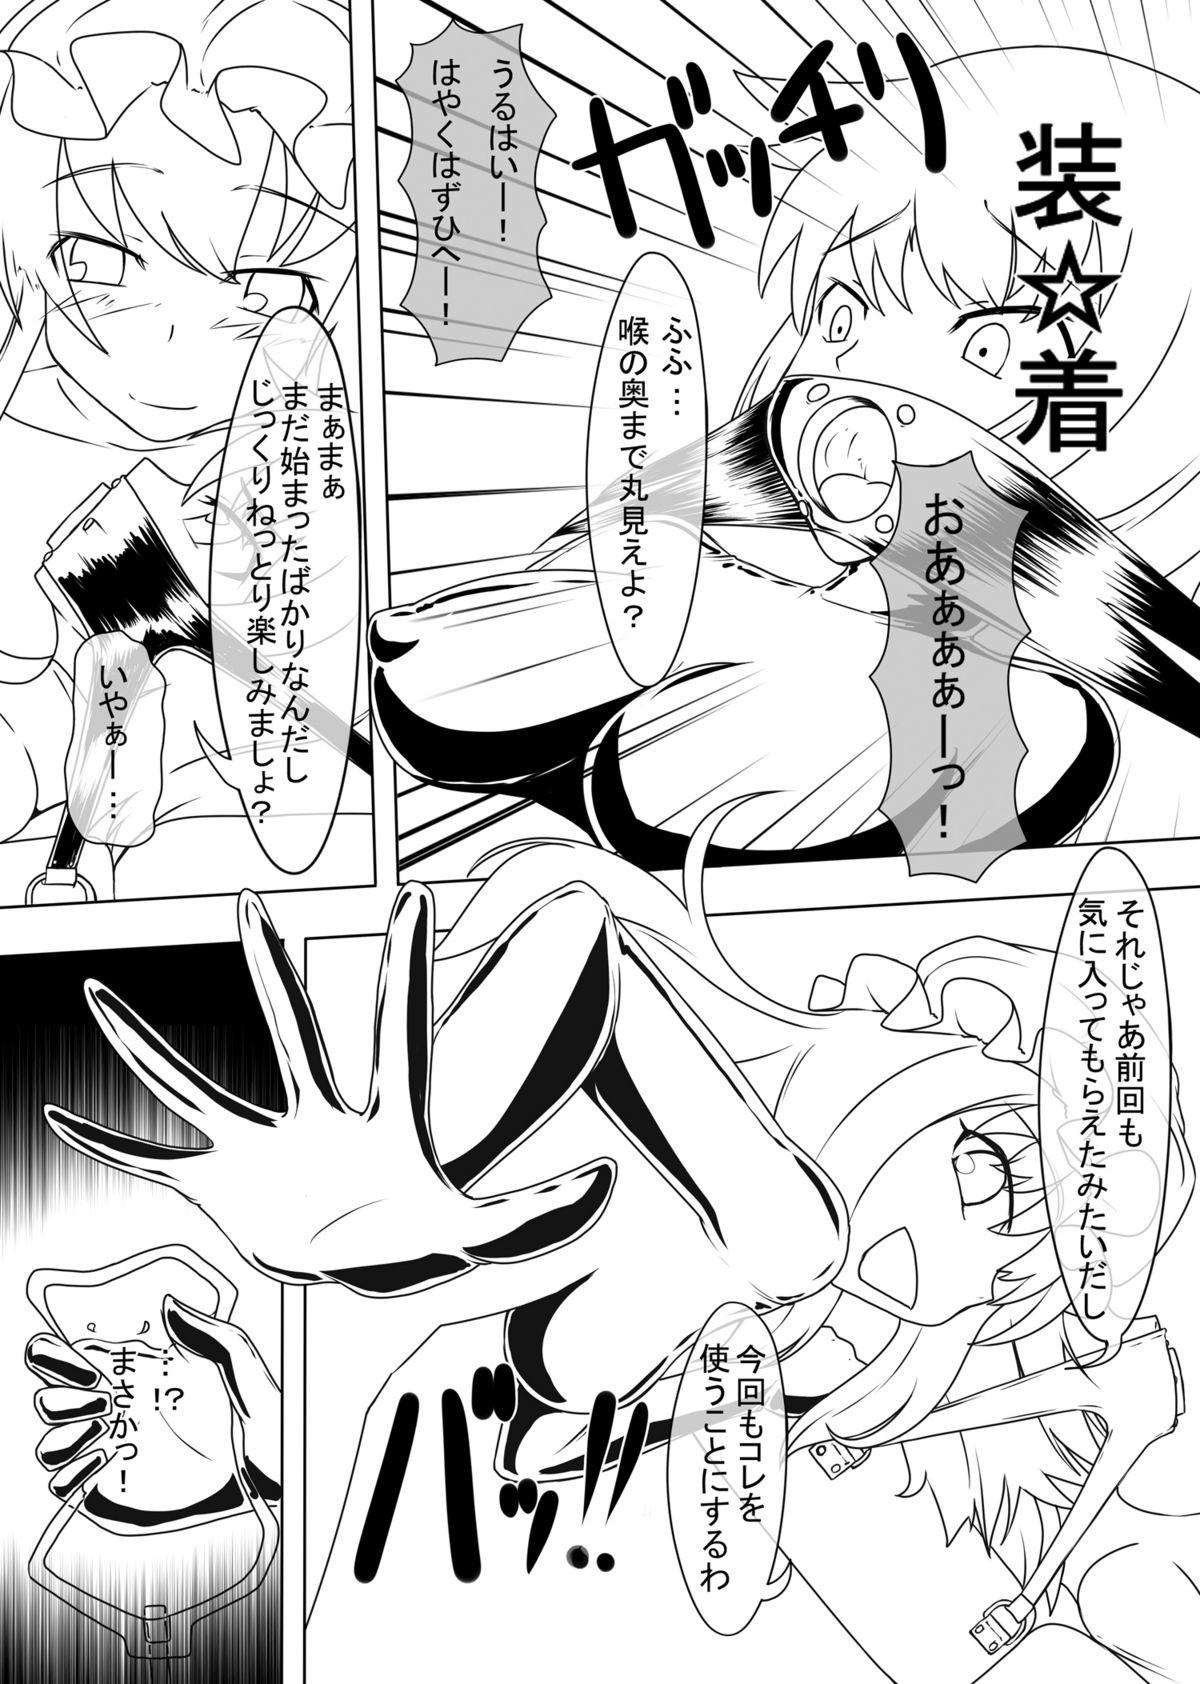 Perrito 2nd Skin Vol.2 - Touhou project Oiled - Page 9